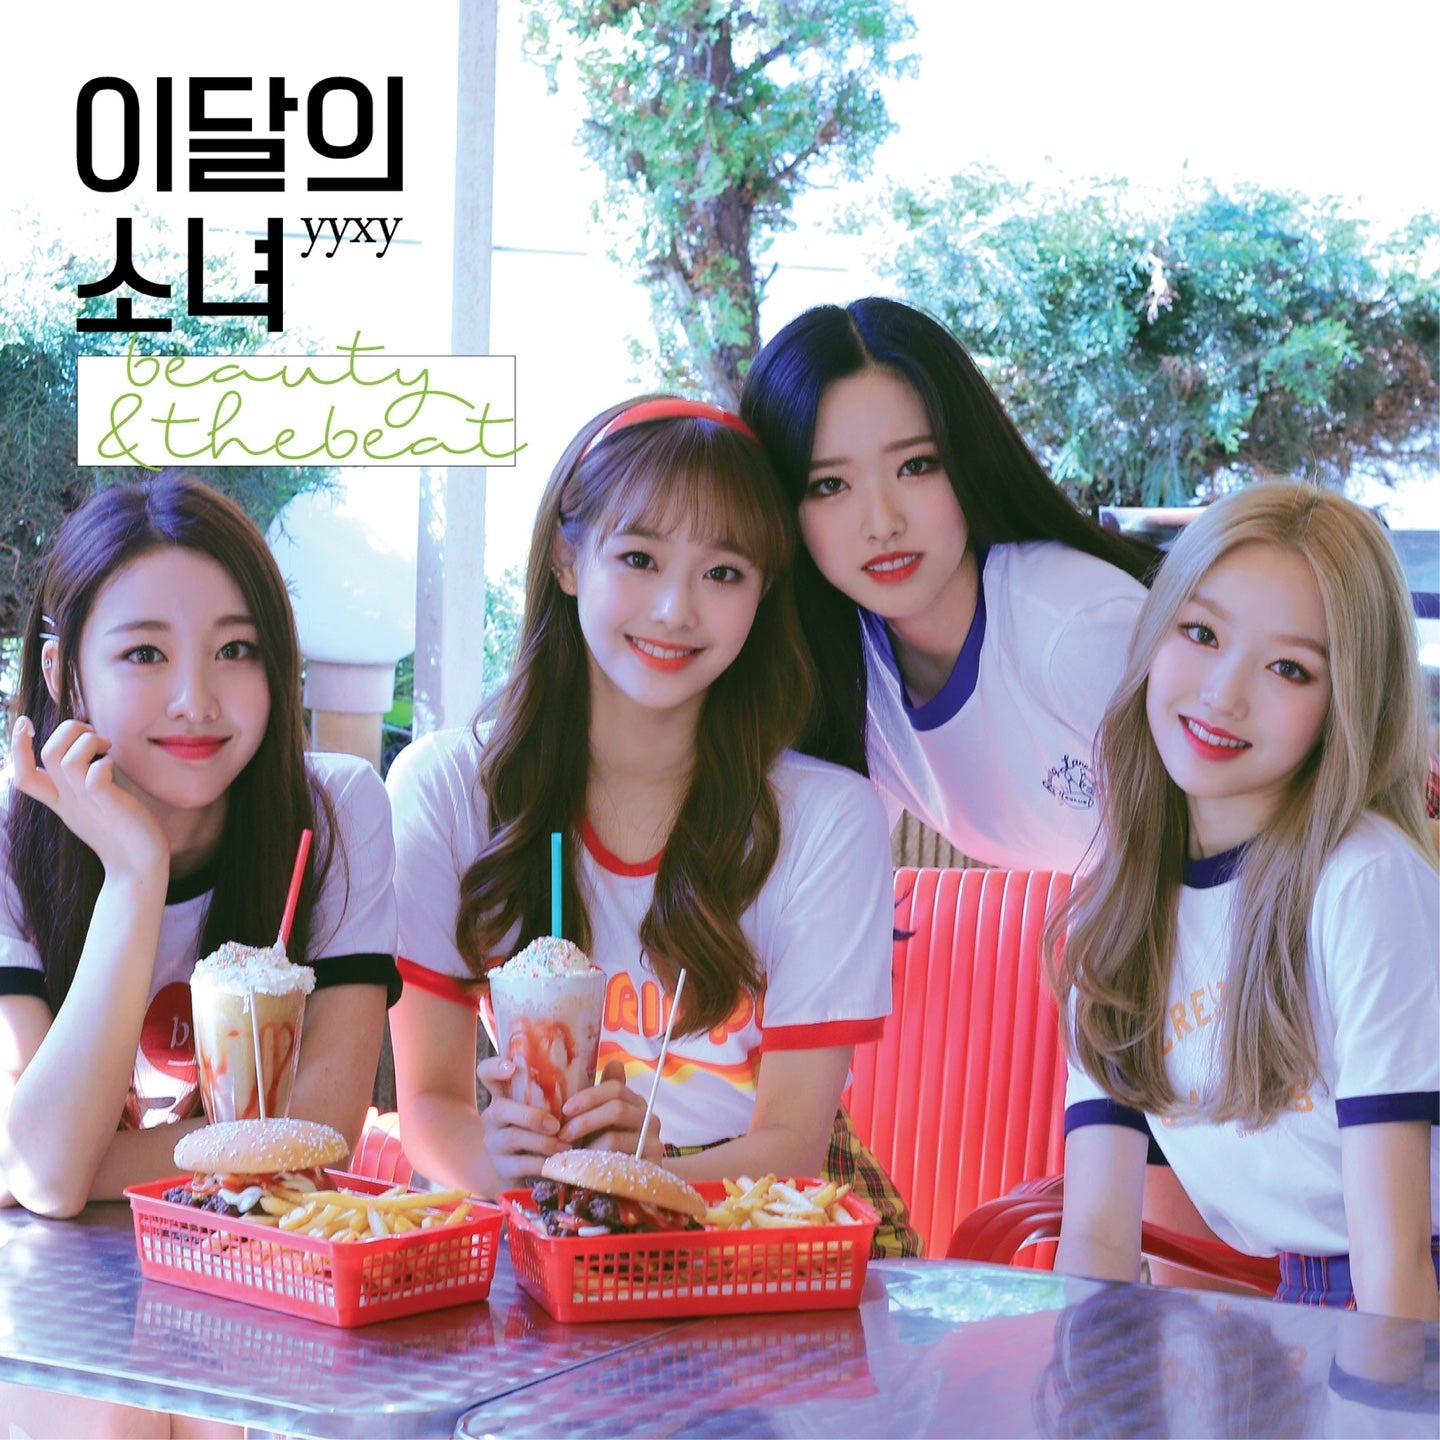 LOONA yyxy Beauty and the Beat